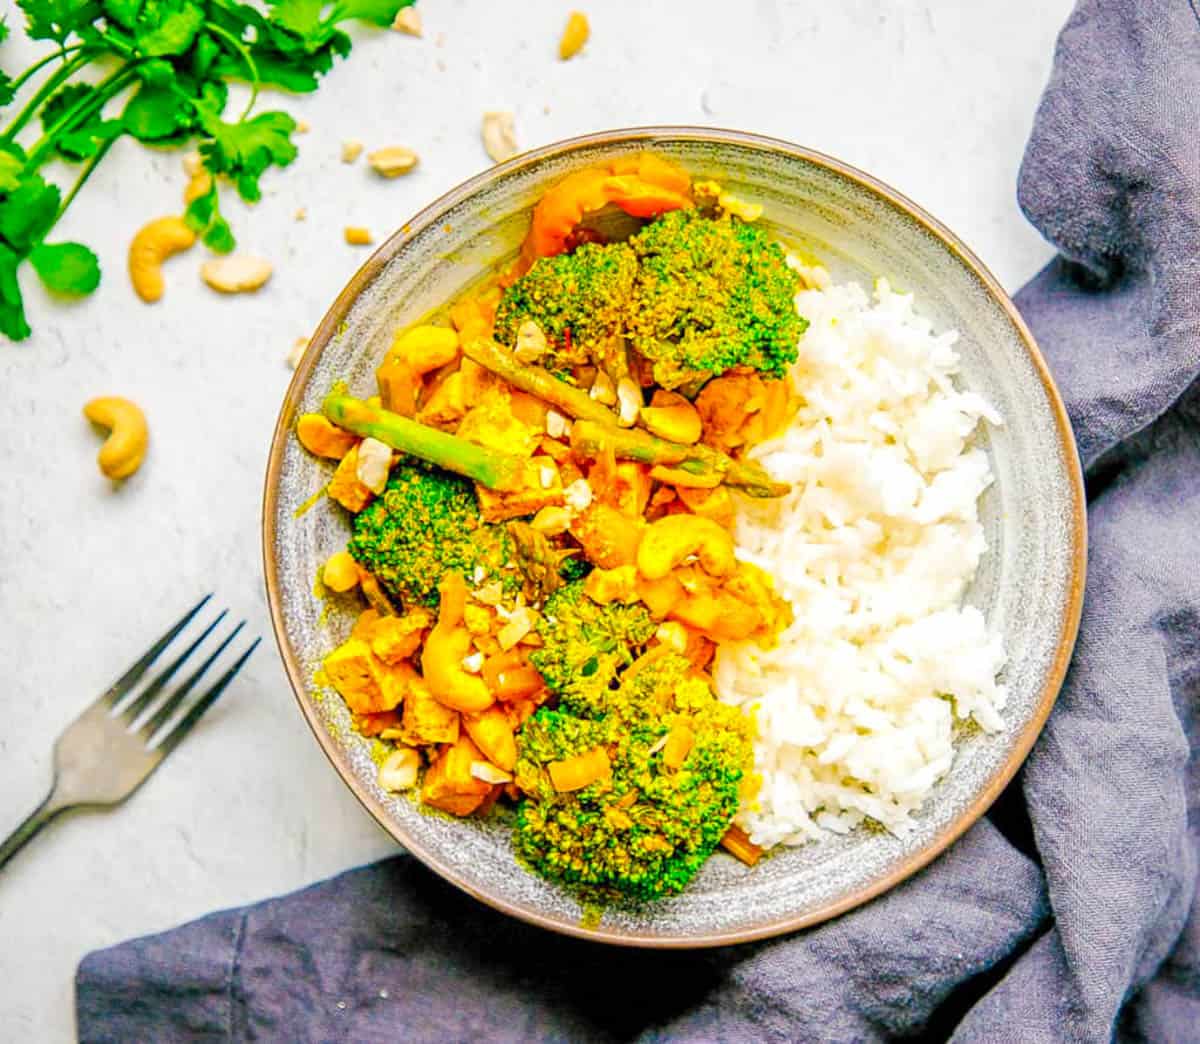 Thai tofu yellow curry with broccoli, ،atoes, asparagus and peppers served with rice in a grey bowl.